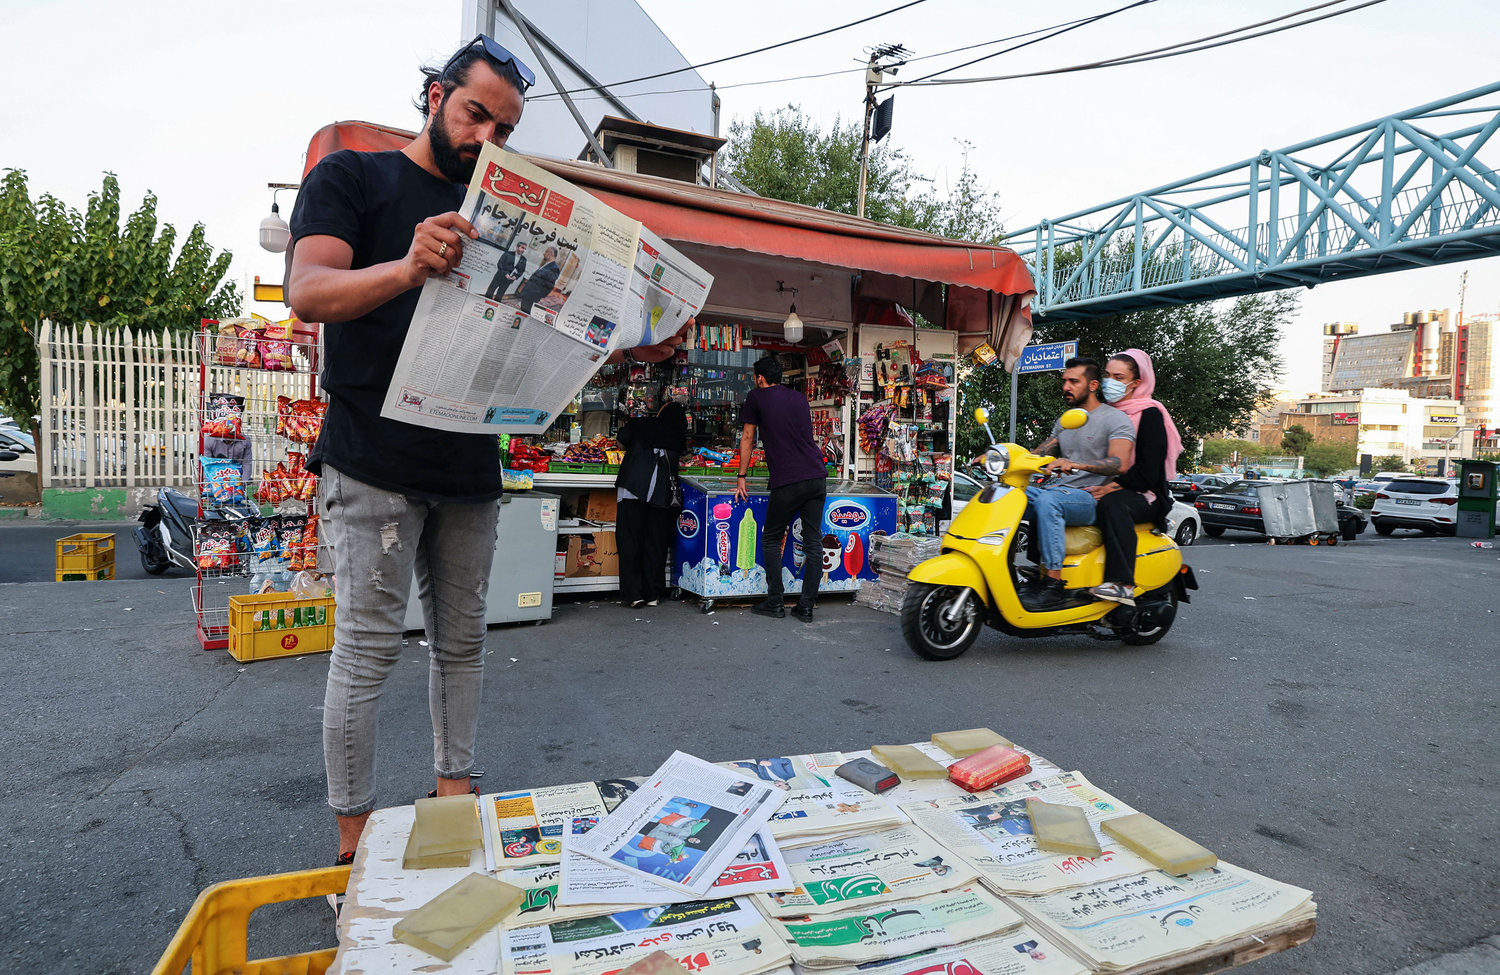 A man reads the Iranian newspaper Etemad, with the front page title reading in Farsi "The night of the end of the JCPOA," and cover photos of Iran's Foreign Miniser Hossein Amir-Abdollahian and his deputy and chief nuclear negotiator Ali Bagheri Kani, in the capital Tehran, on Tuesday, Aug. 16, 2022. (Atta Kenare/AFP/Getty Images/TNS)